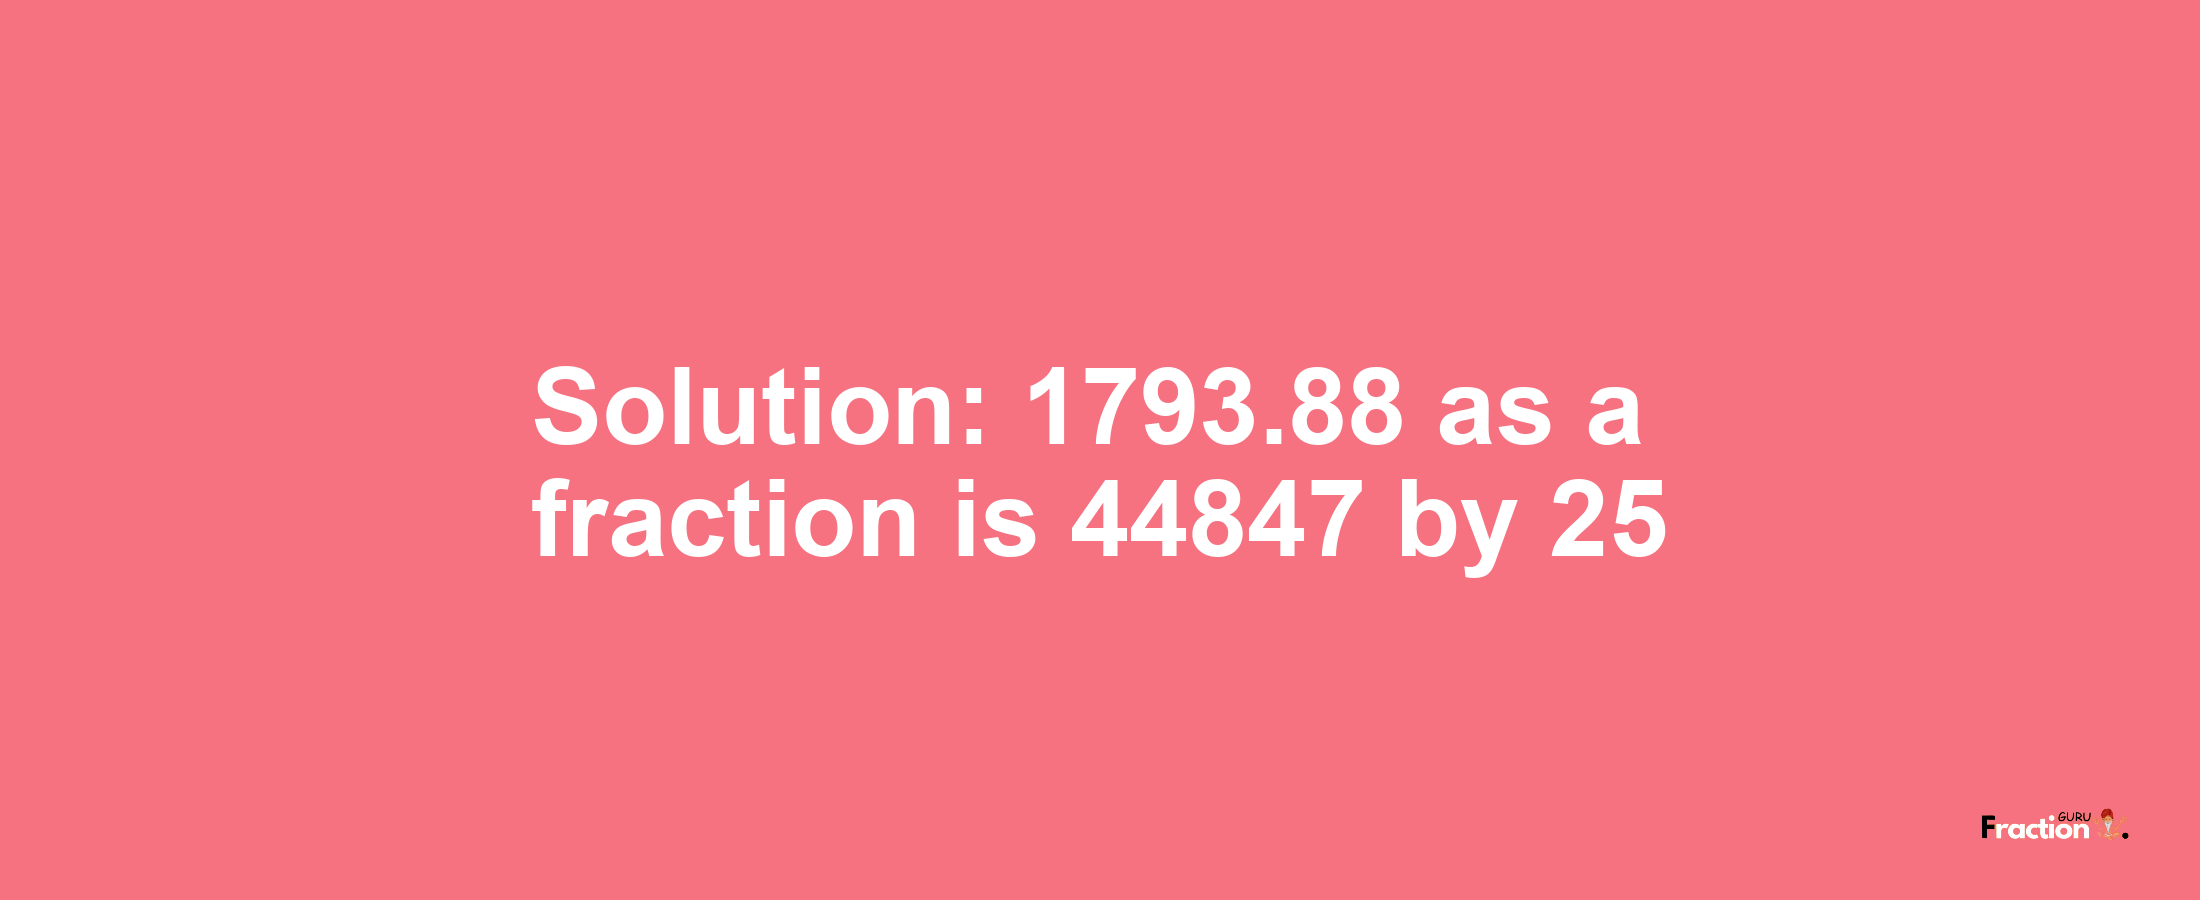 Solution:1793.88 as a fraction is 44847/25